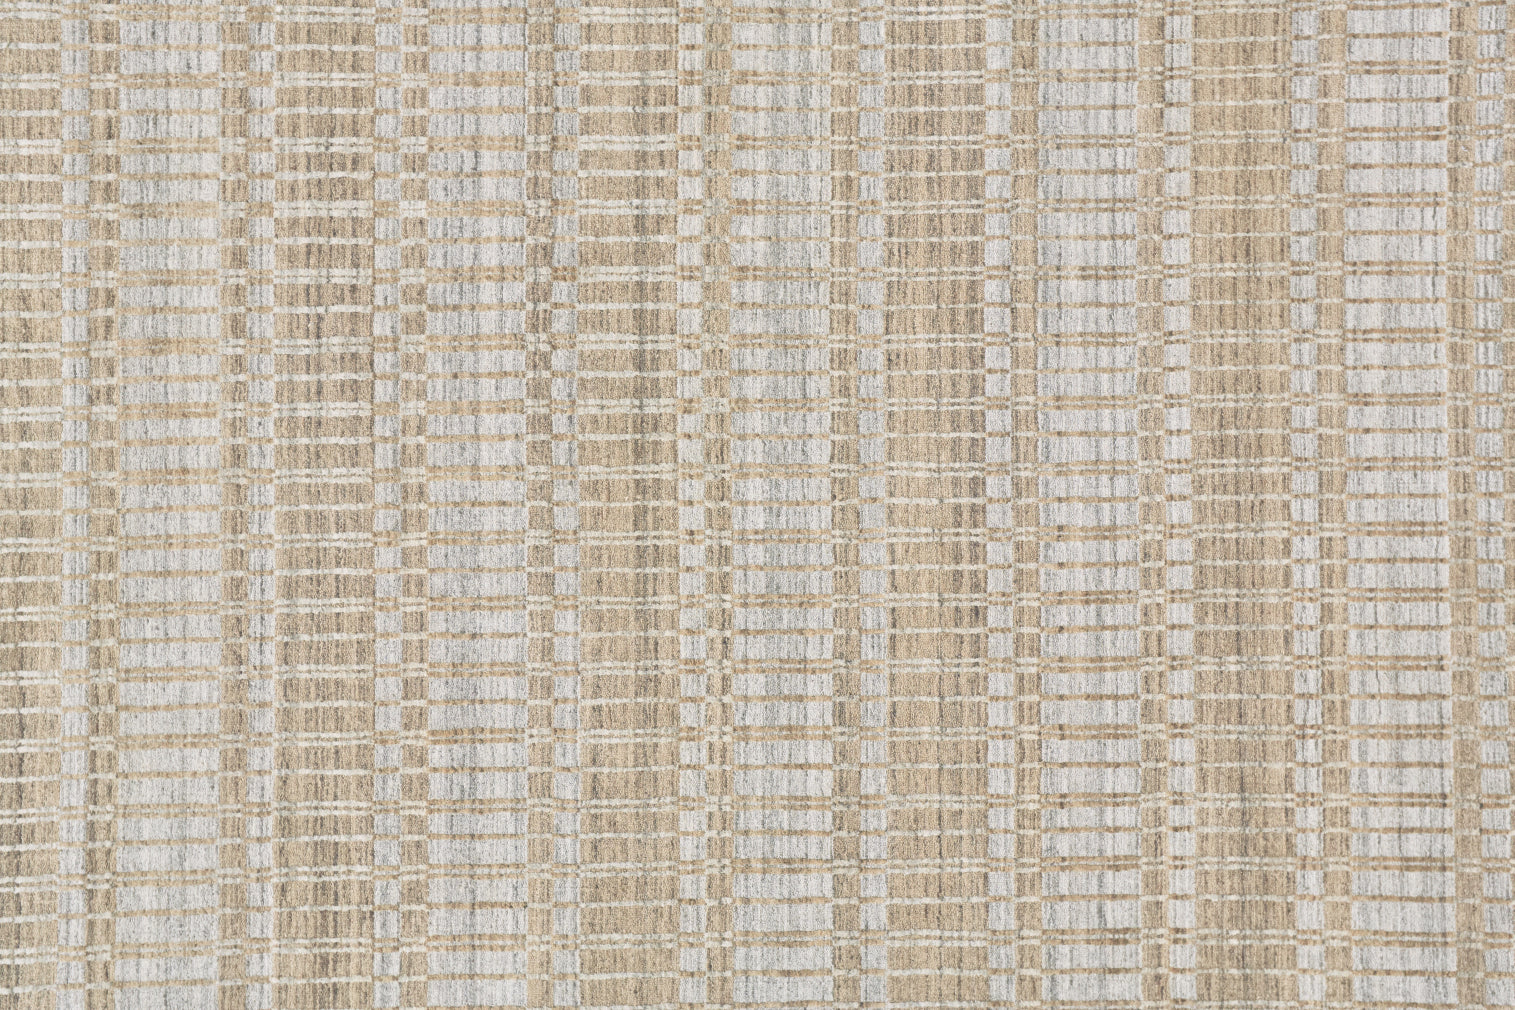 Feizy Odell 6385F Beige/Gray Area Rug